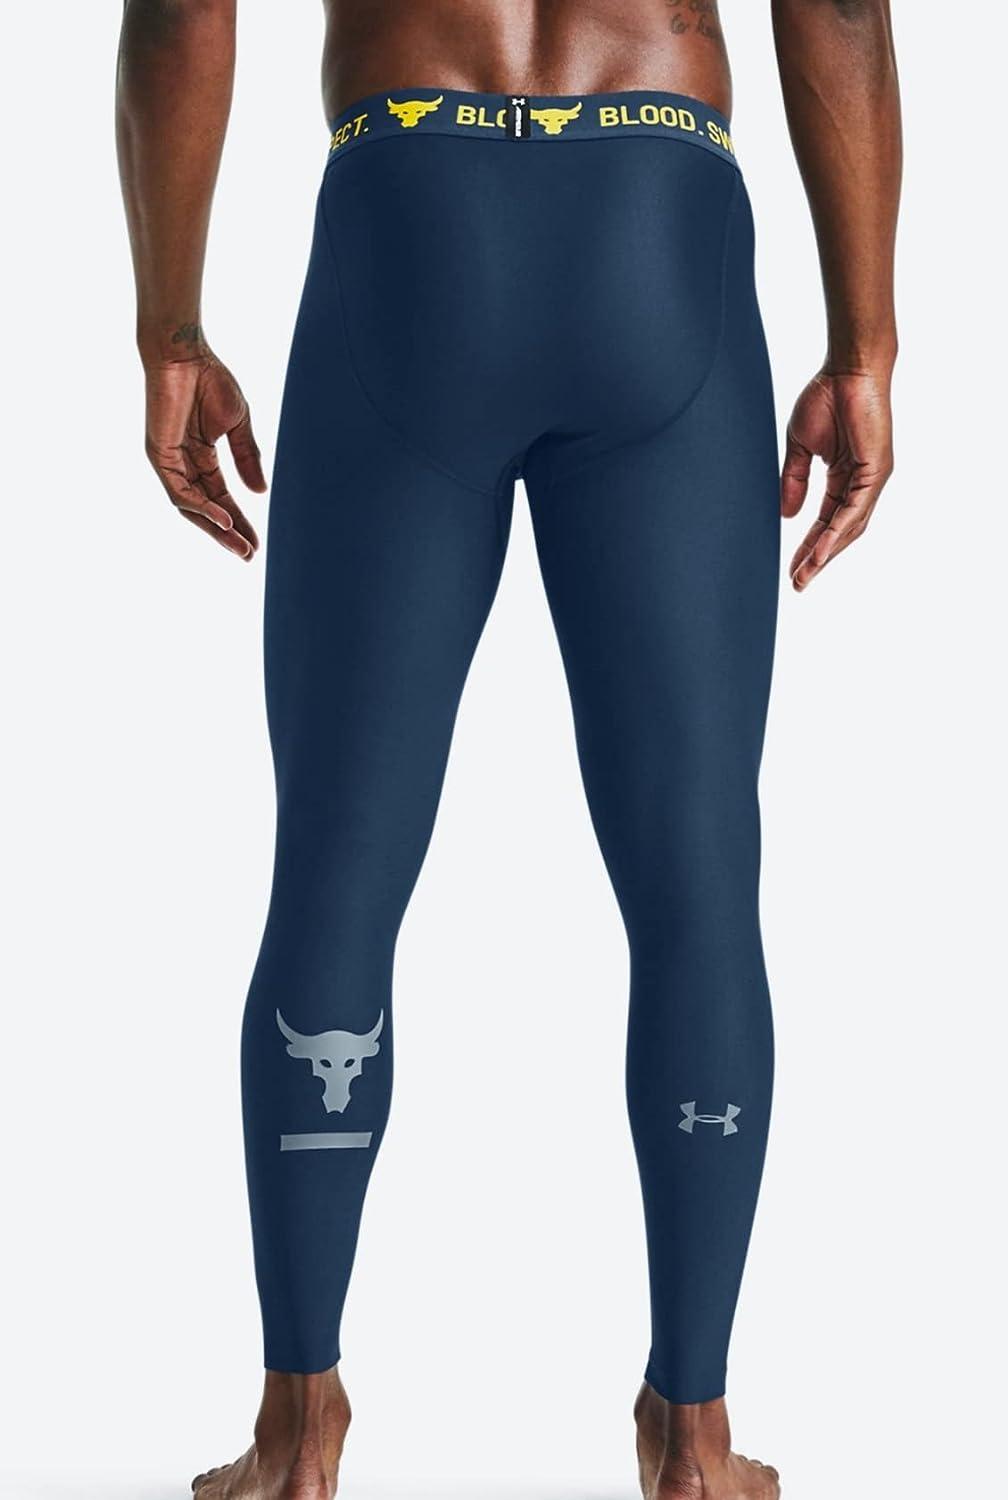 Under Armour UA Project Rock Compression Workout Brahma Bull Pants Small  Navy